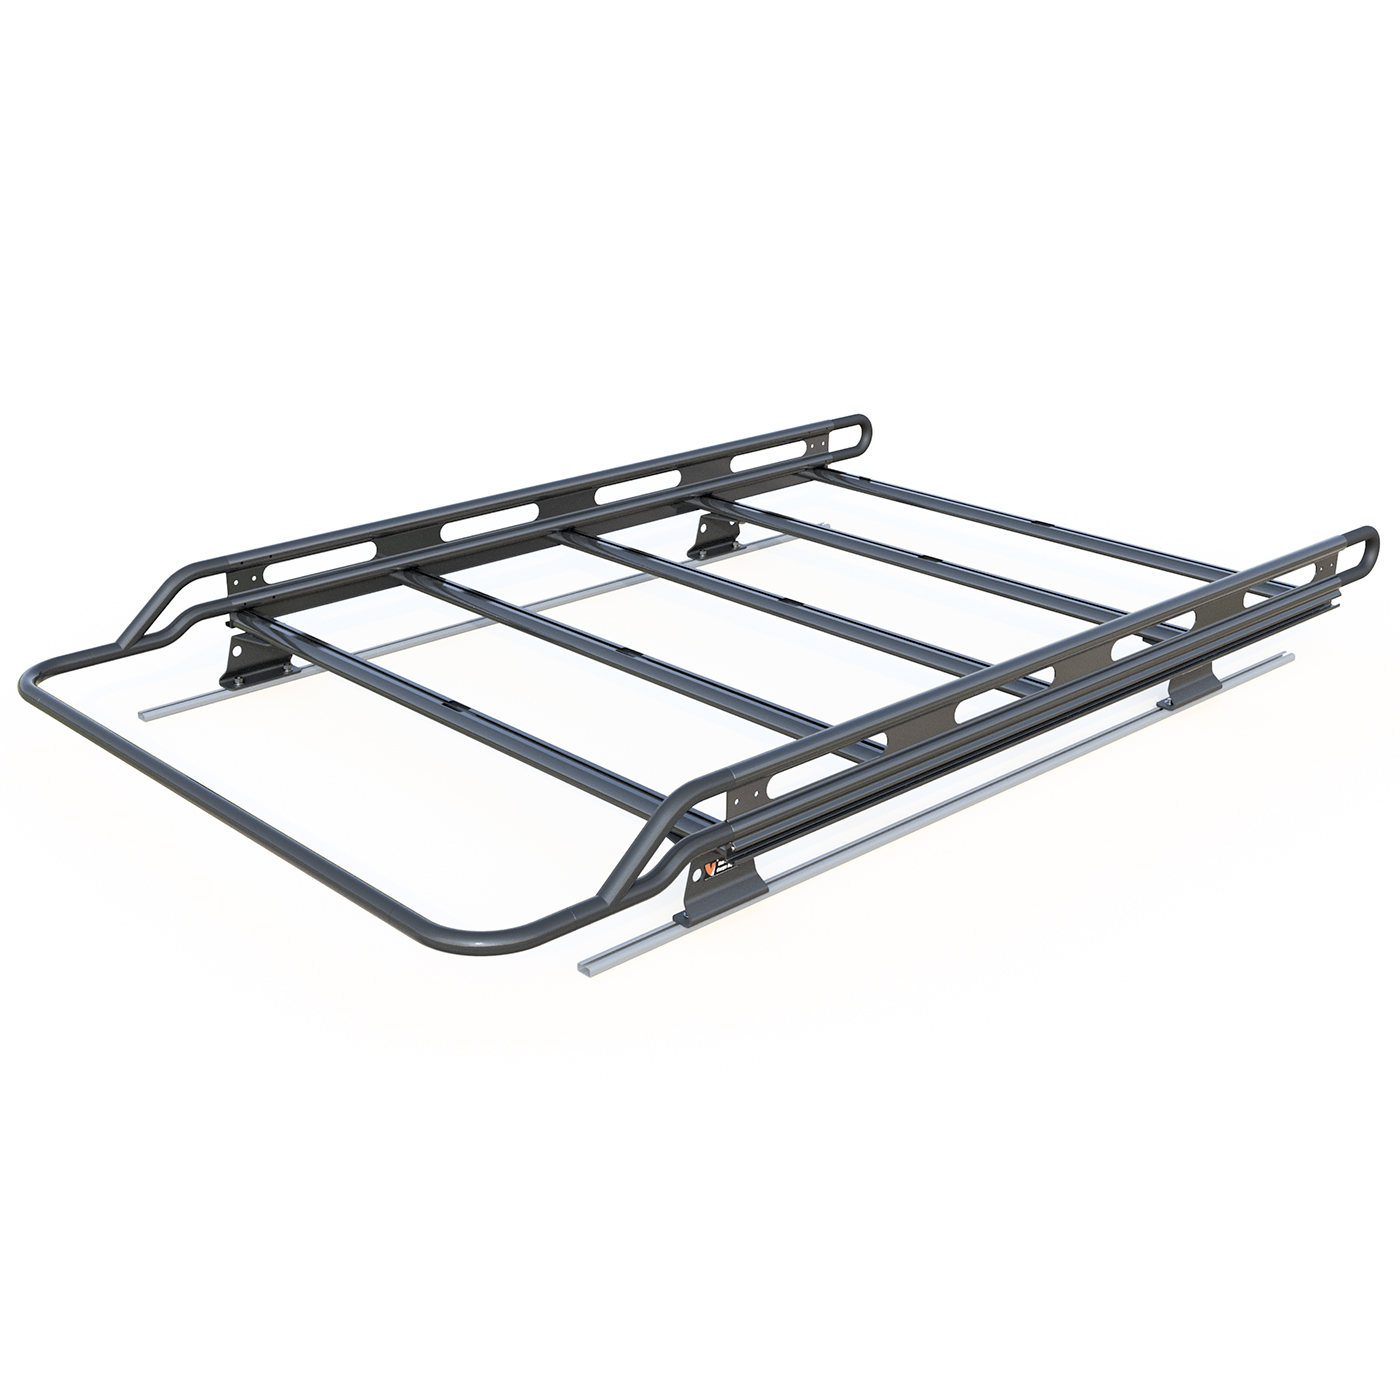 H2.1 Ladder Roof Rack For Ford Transit Connect 2008-2013 - VANTECH USA